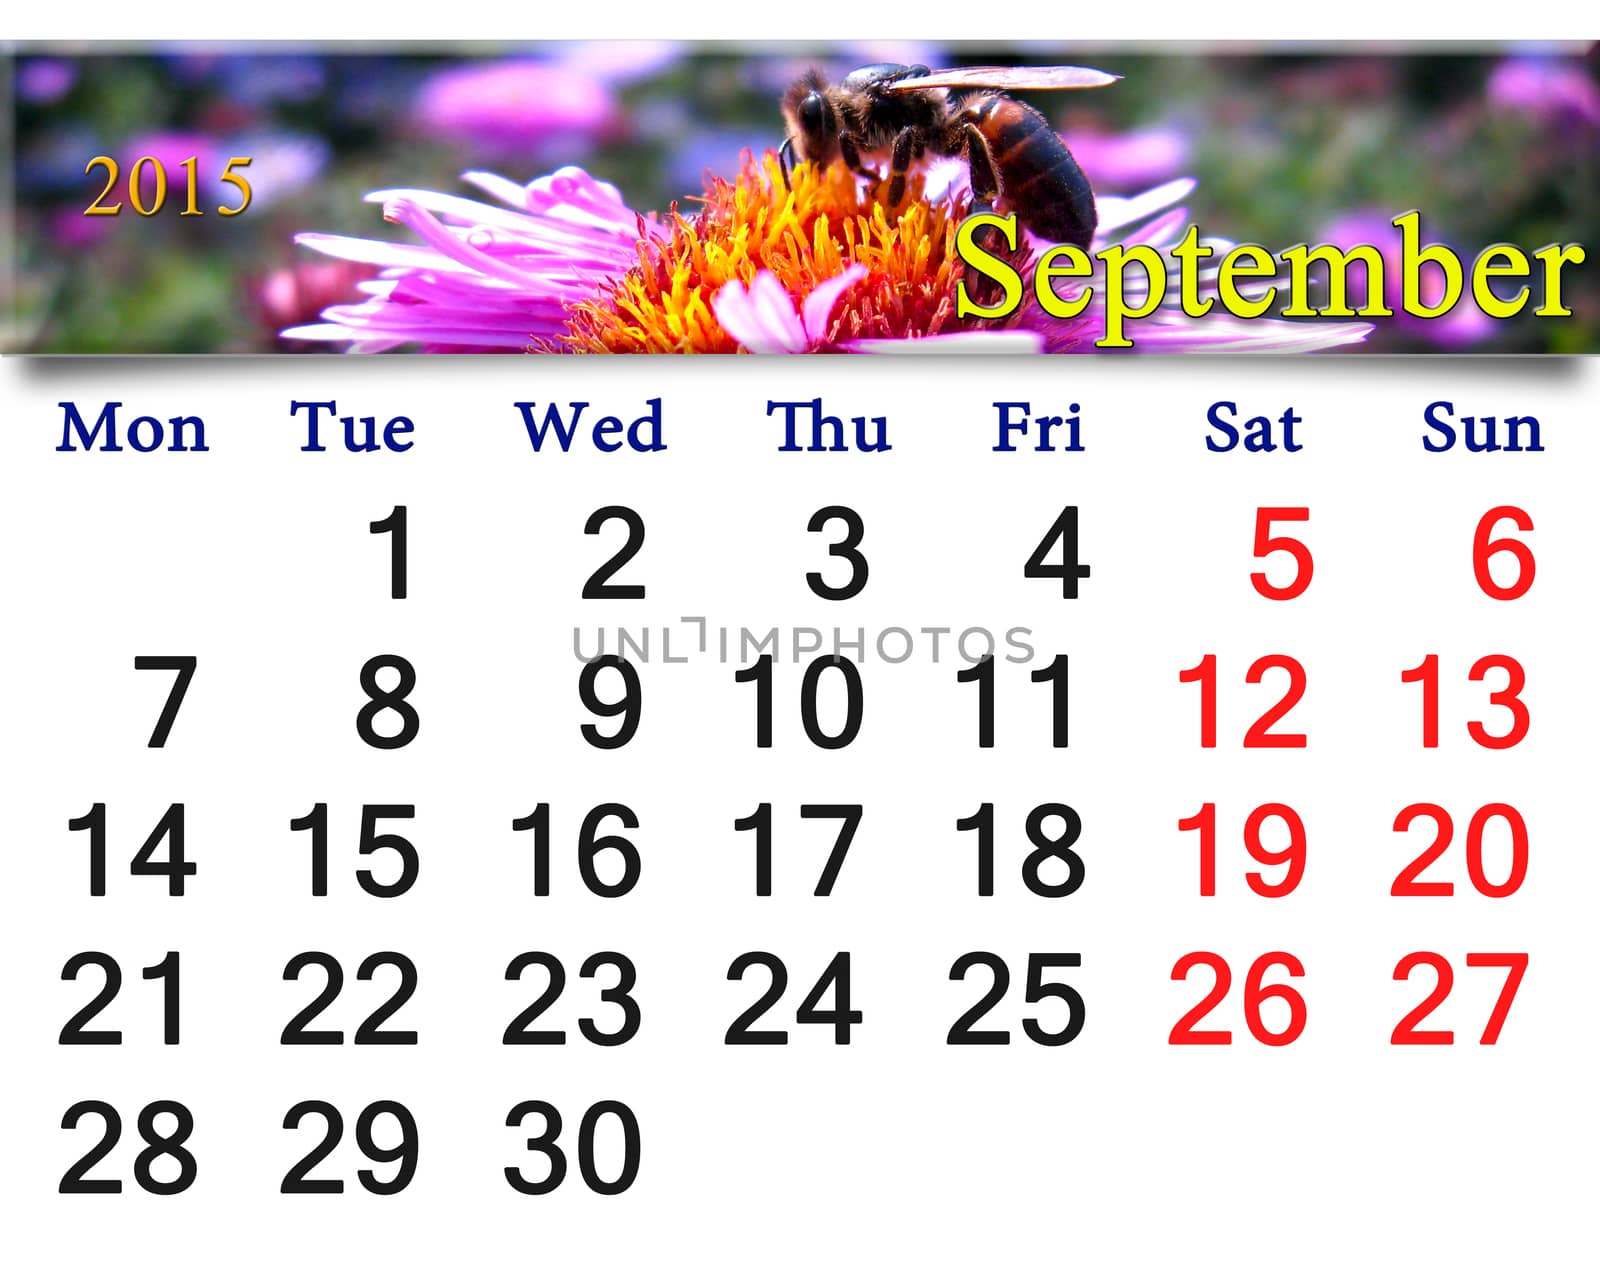 calendar for September of 2015 with bee on flower by alexmak